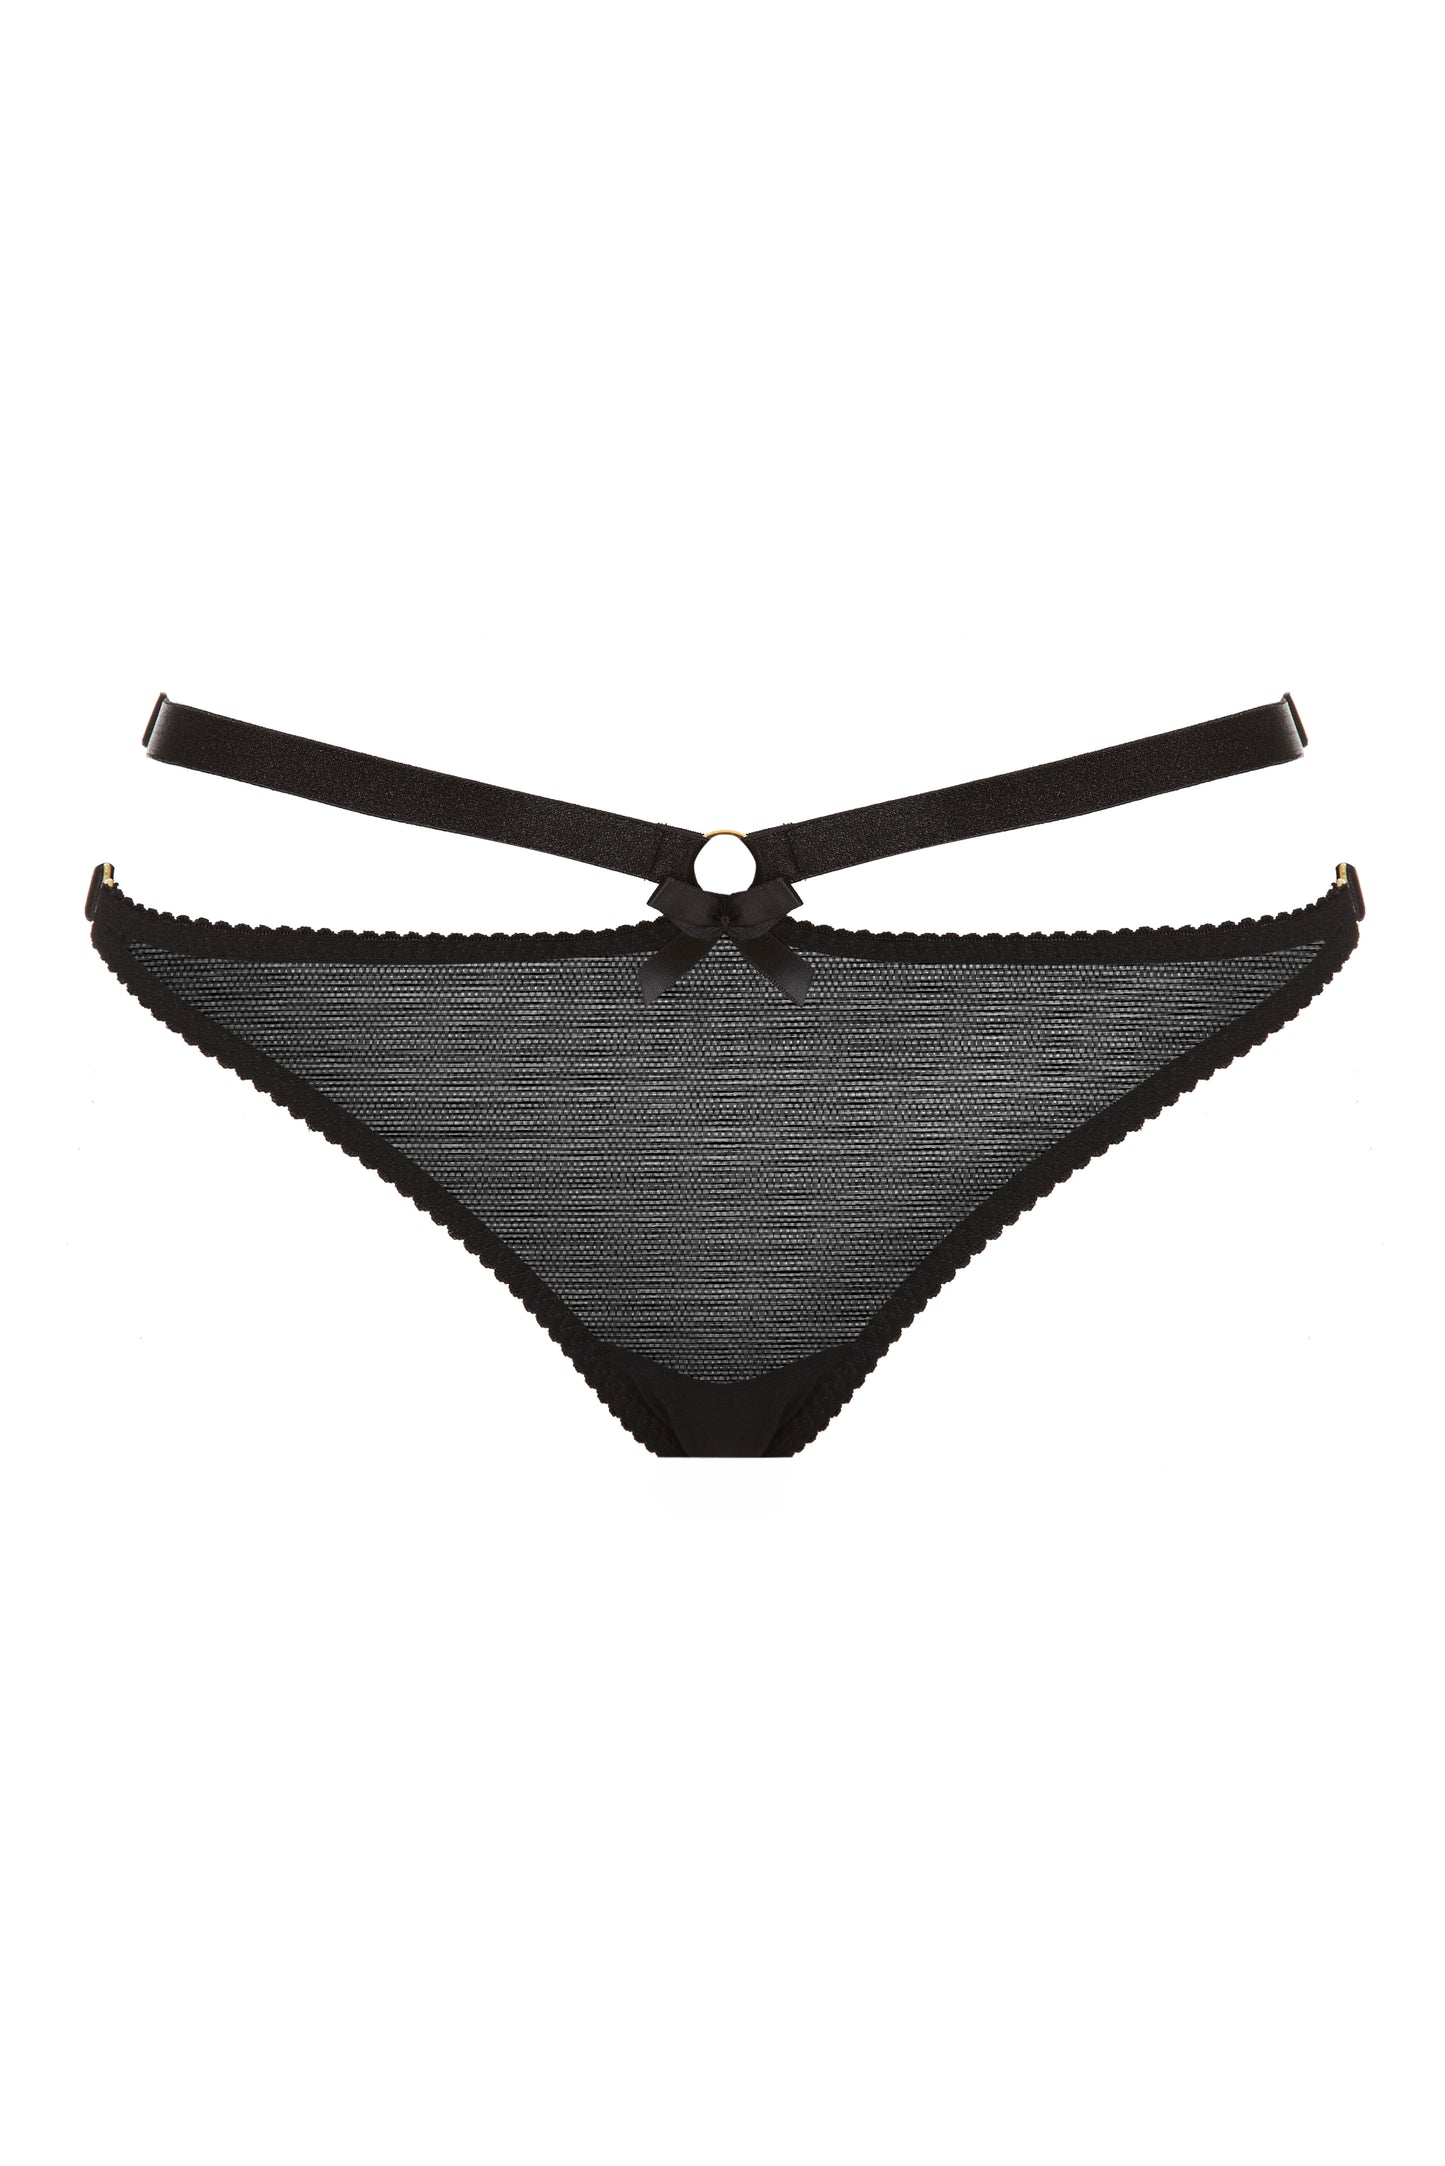 Black Bordelle Harness Thong freeshipping - TrousseauOfDallas